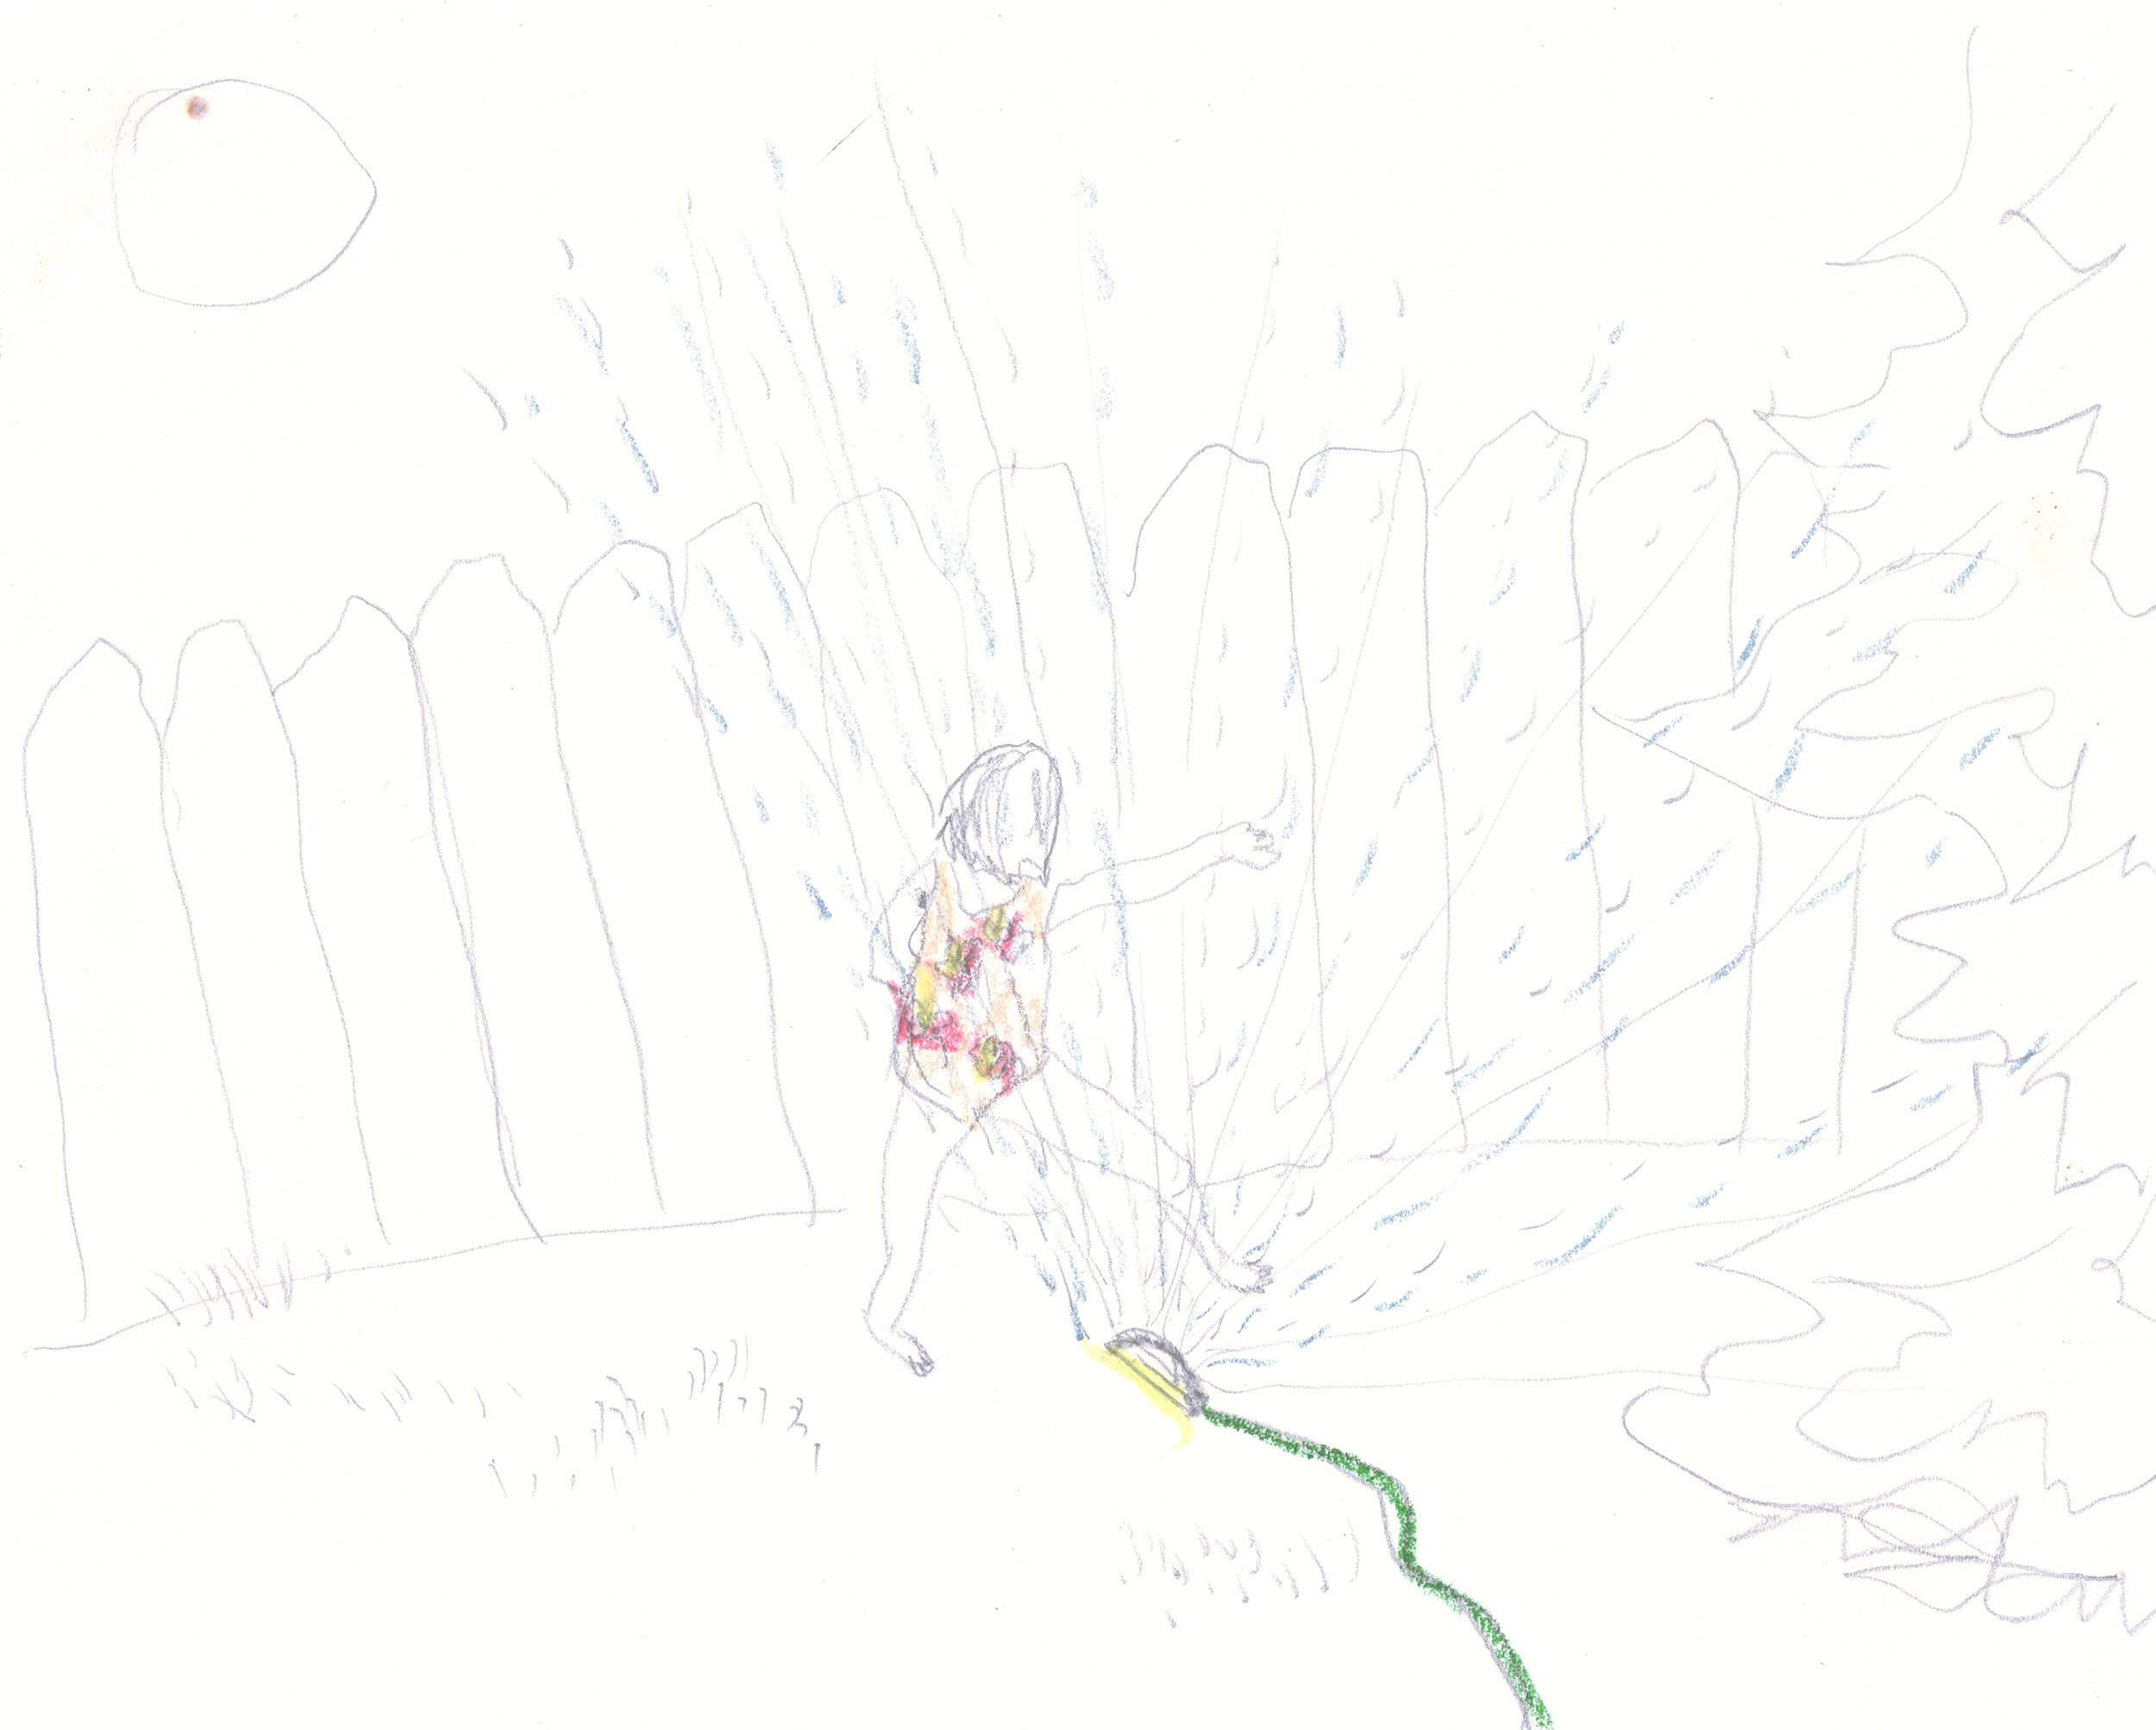 Left Hand Drawing (Playing in the Hose)